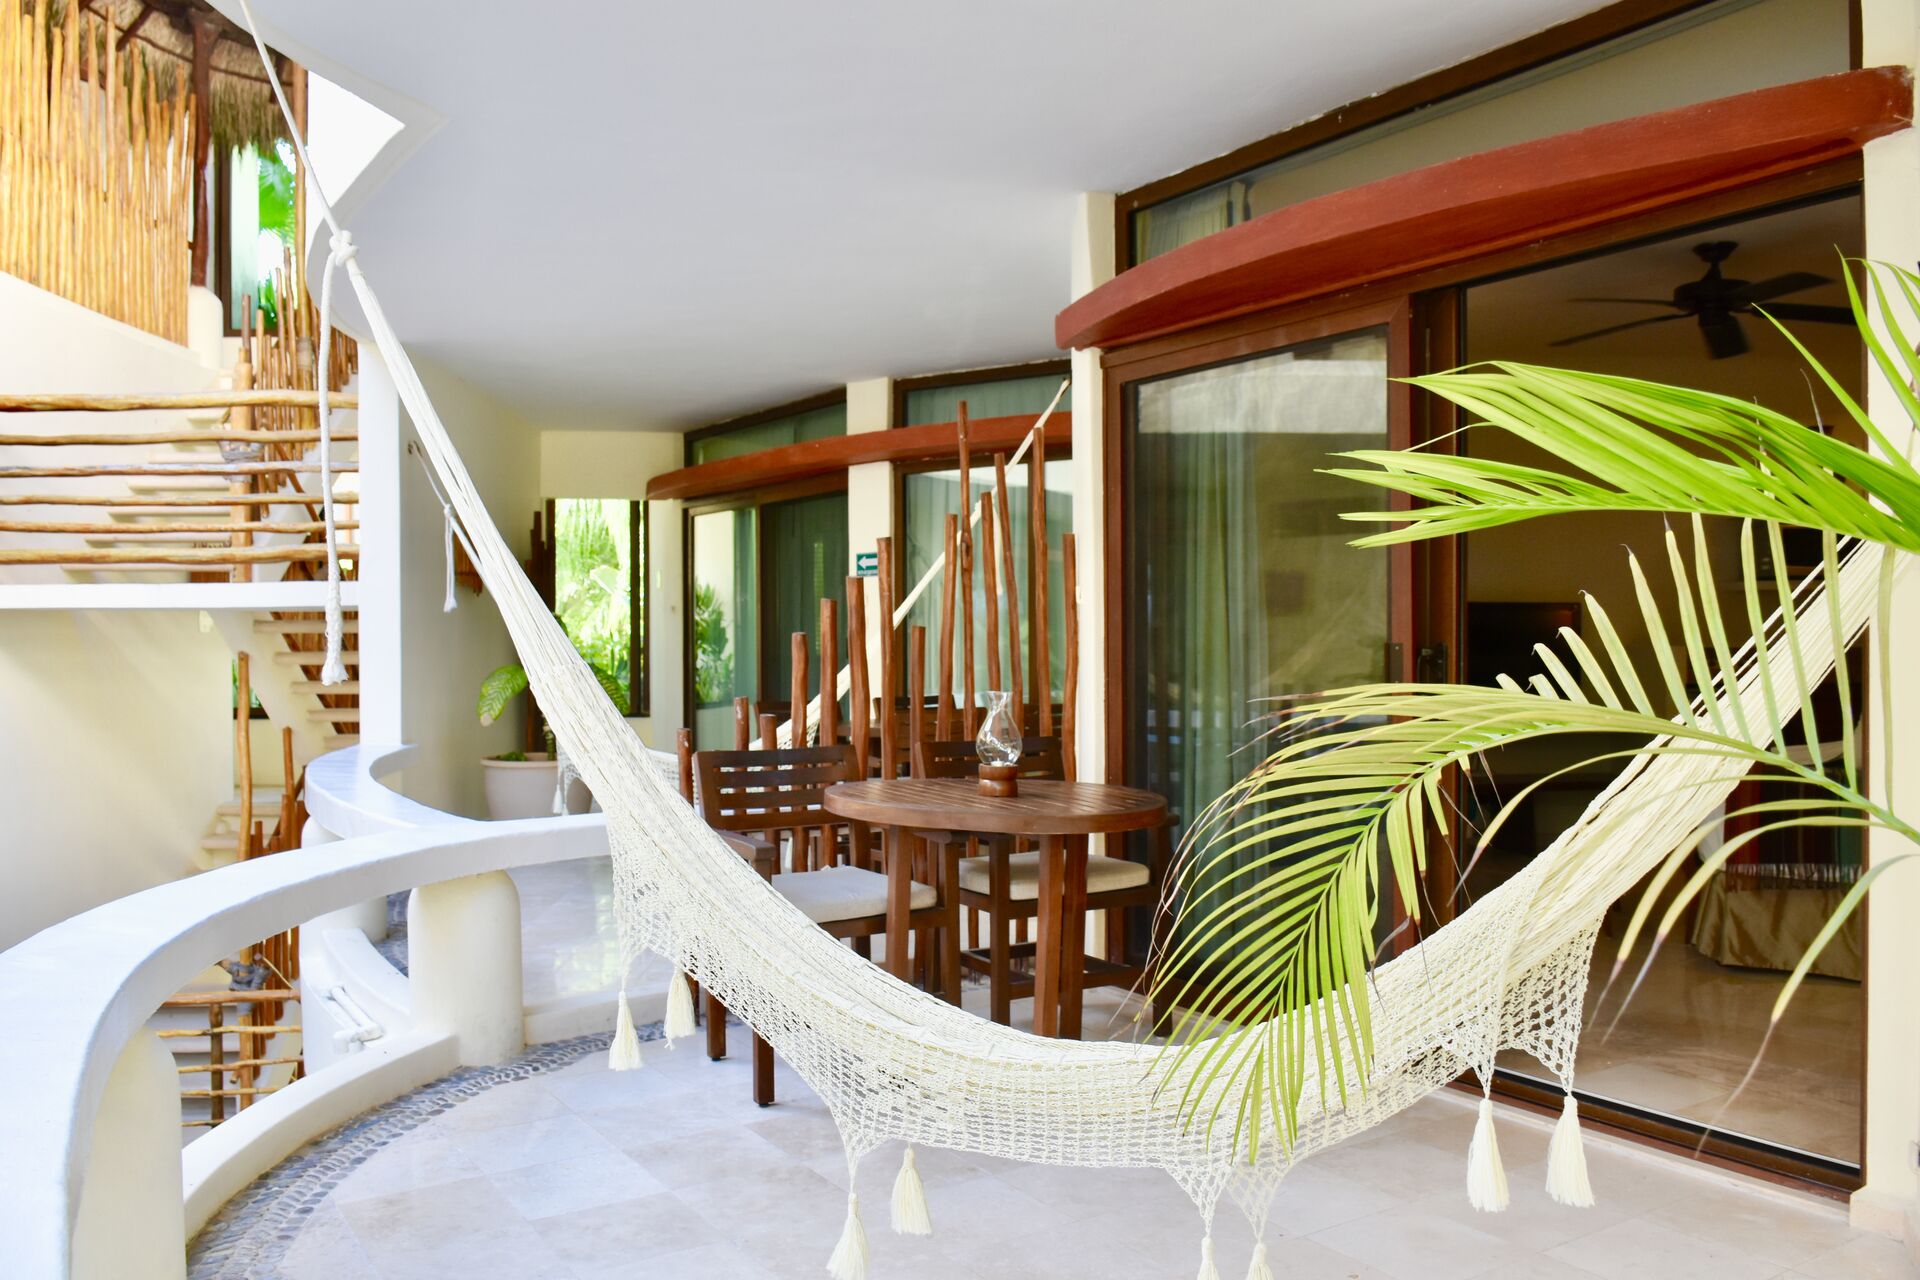 Large private balcony with chairs and hammock.